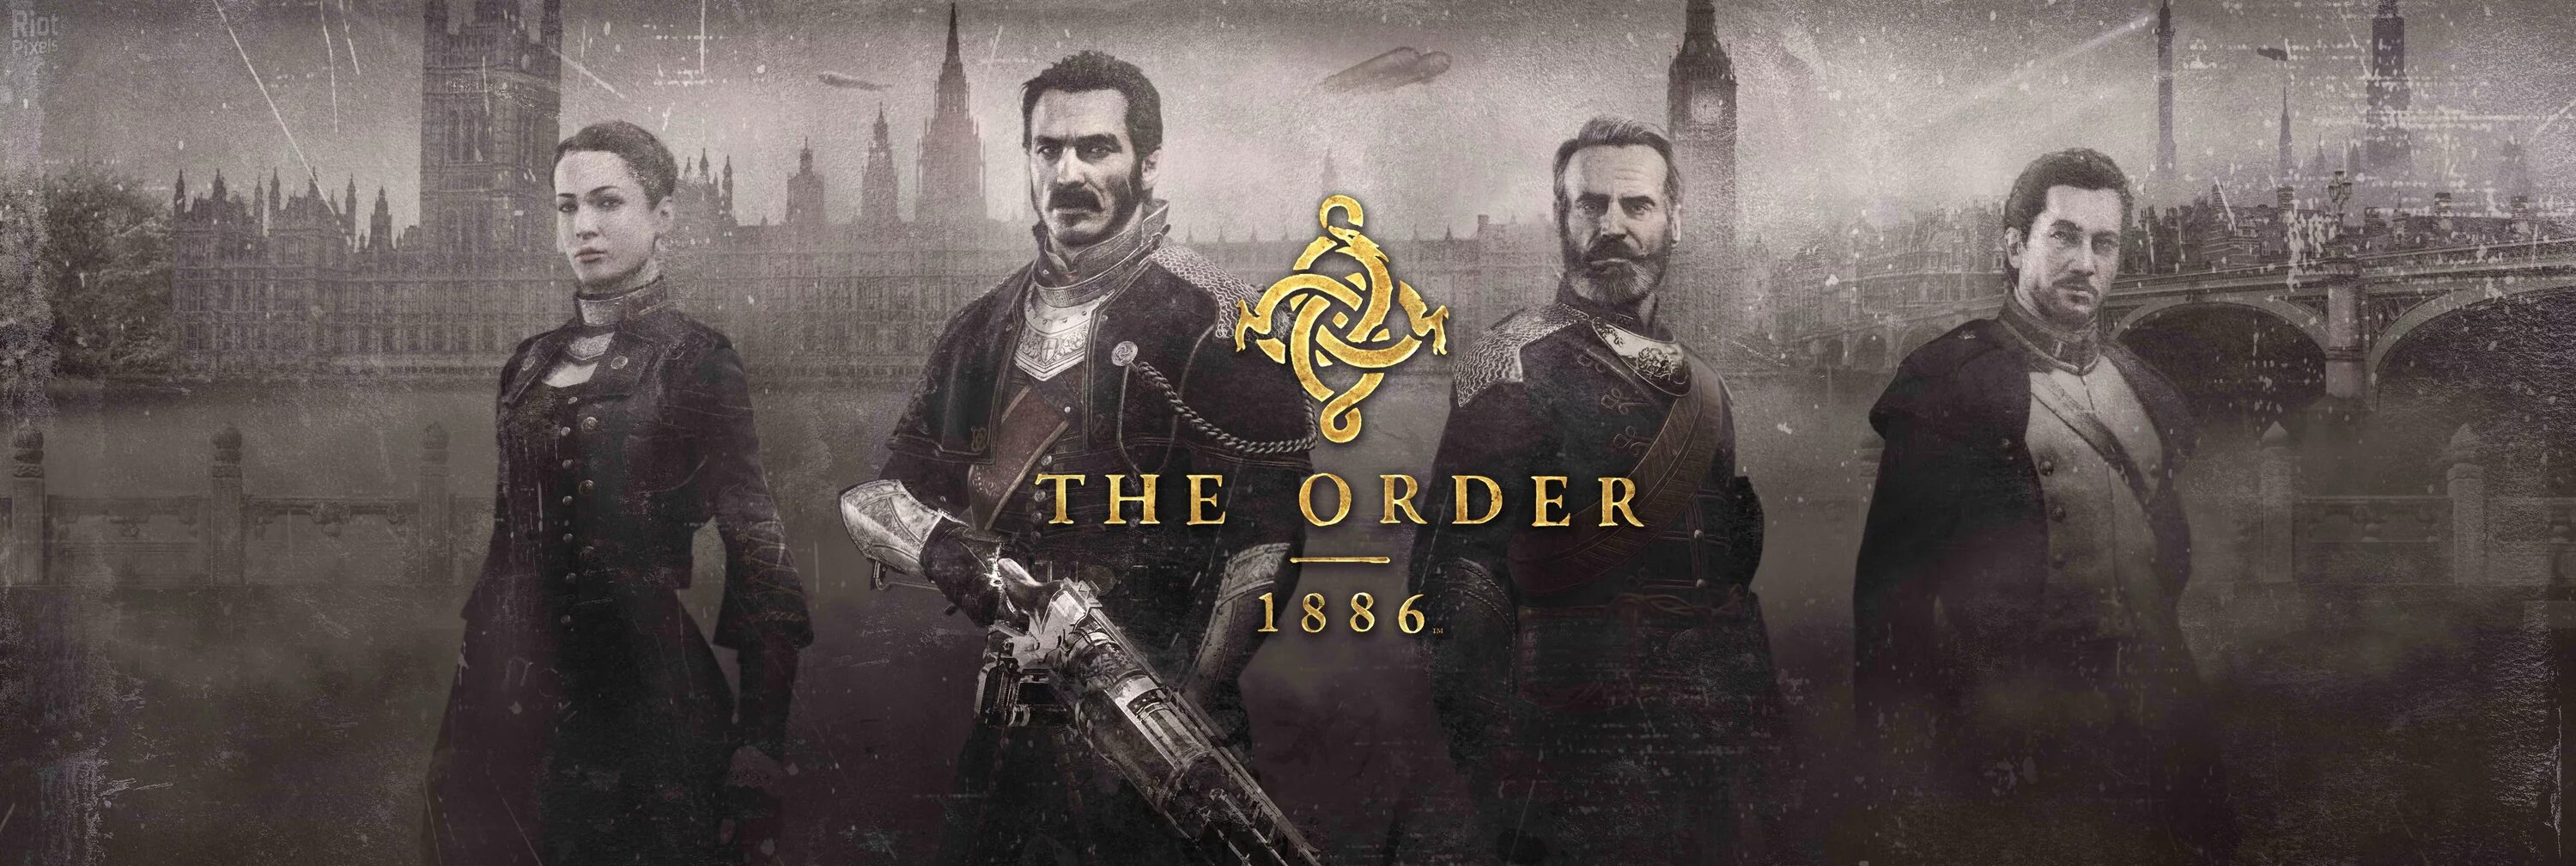 The order: 1886. Орден 1886 (ps4). Order 1886 ps4. The order 1886 Постер.